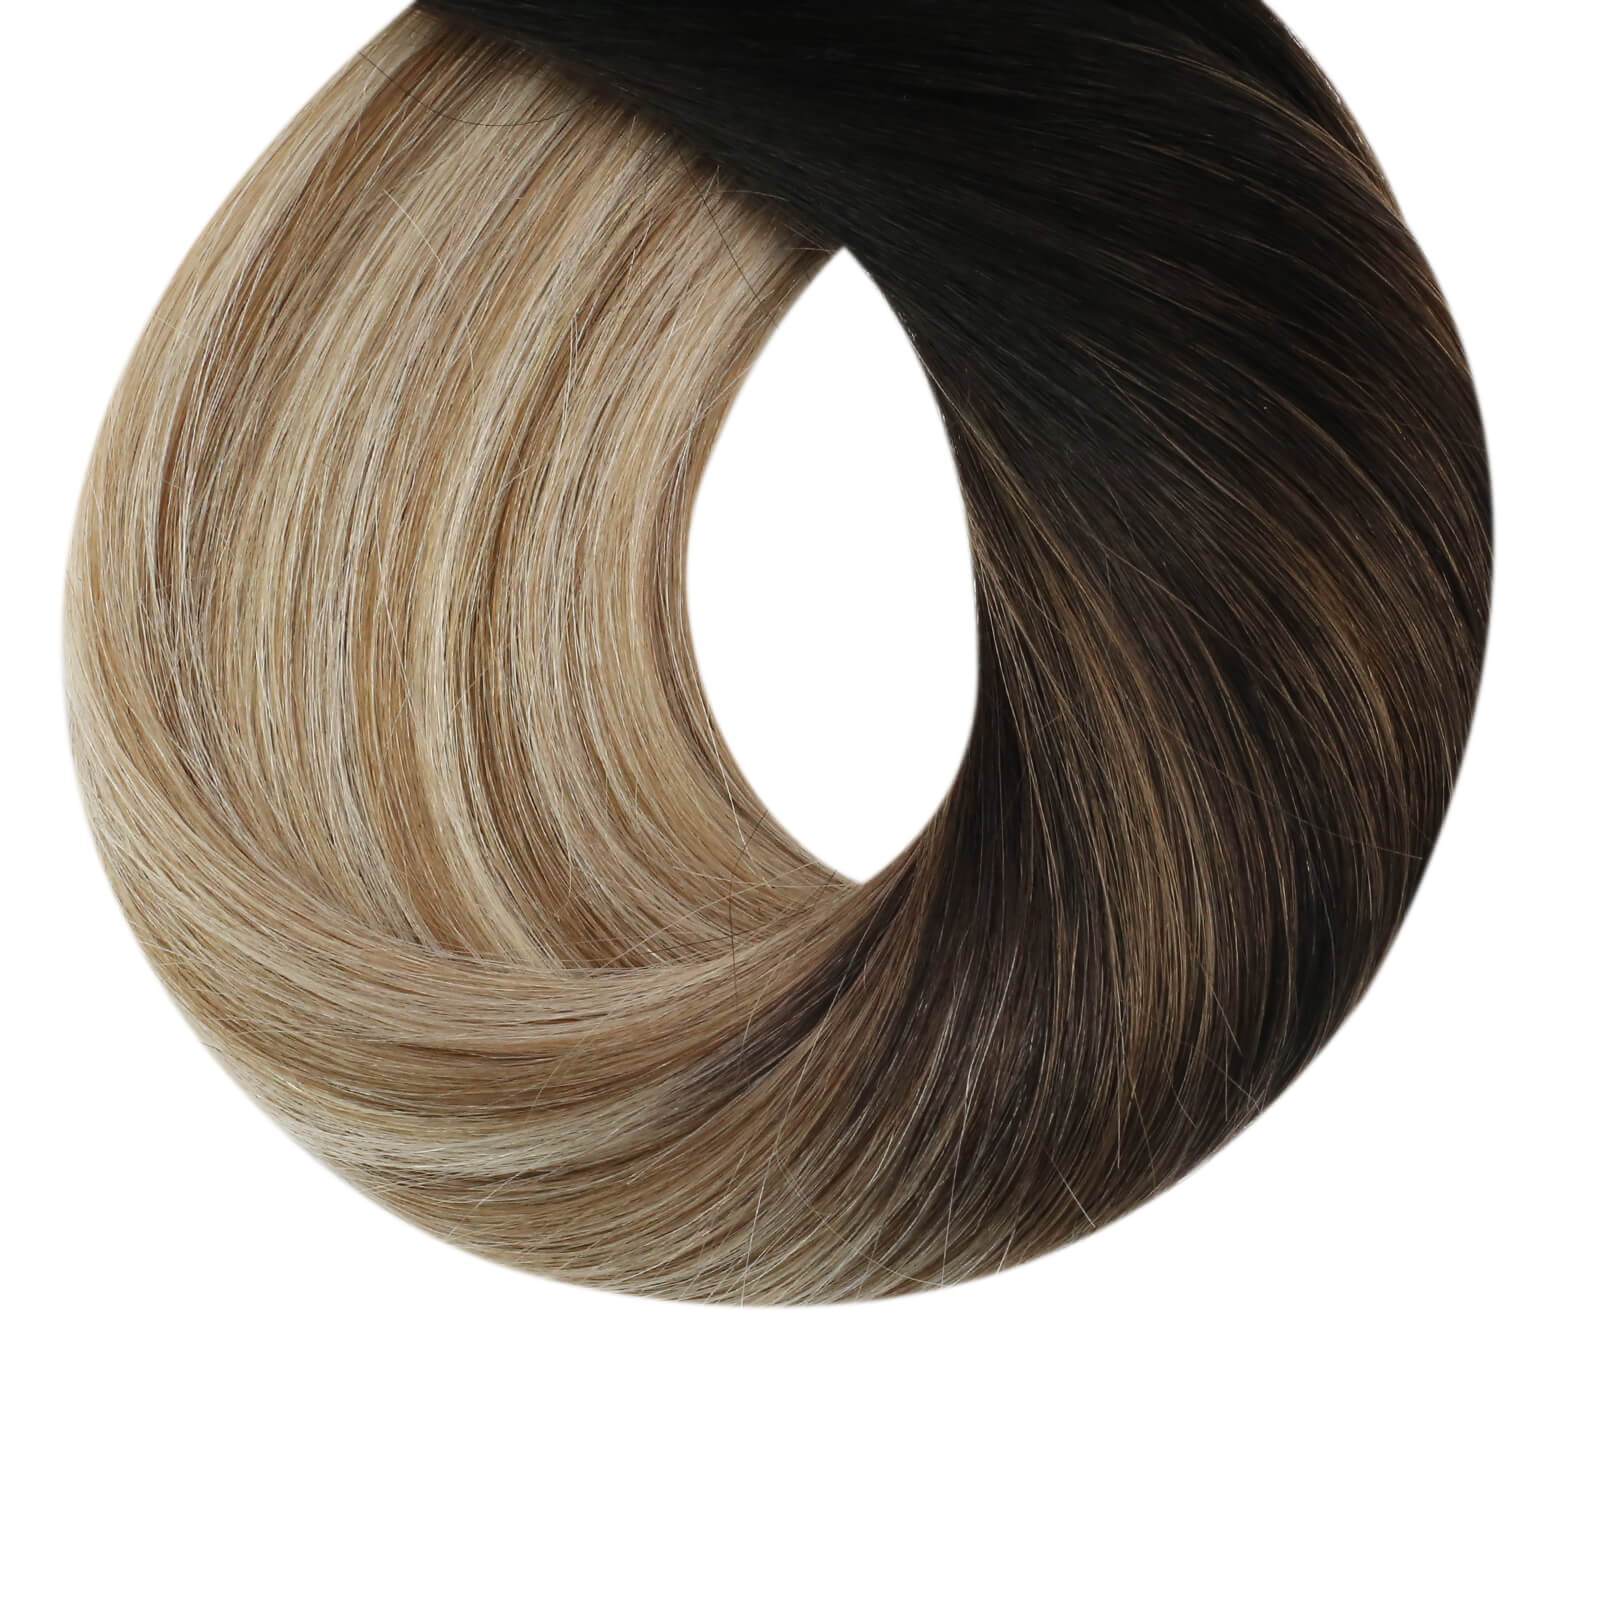 Silky Straight Hair Extensions Tape in 1B Black Fading to 10 Brown and 60 Blonde